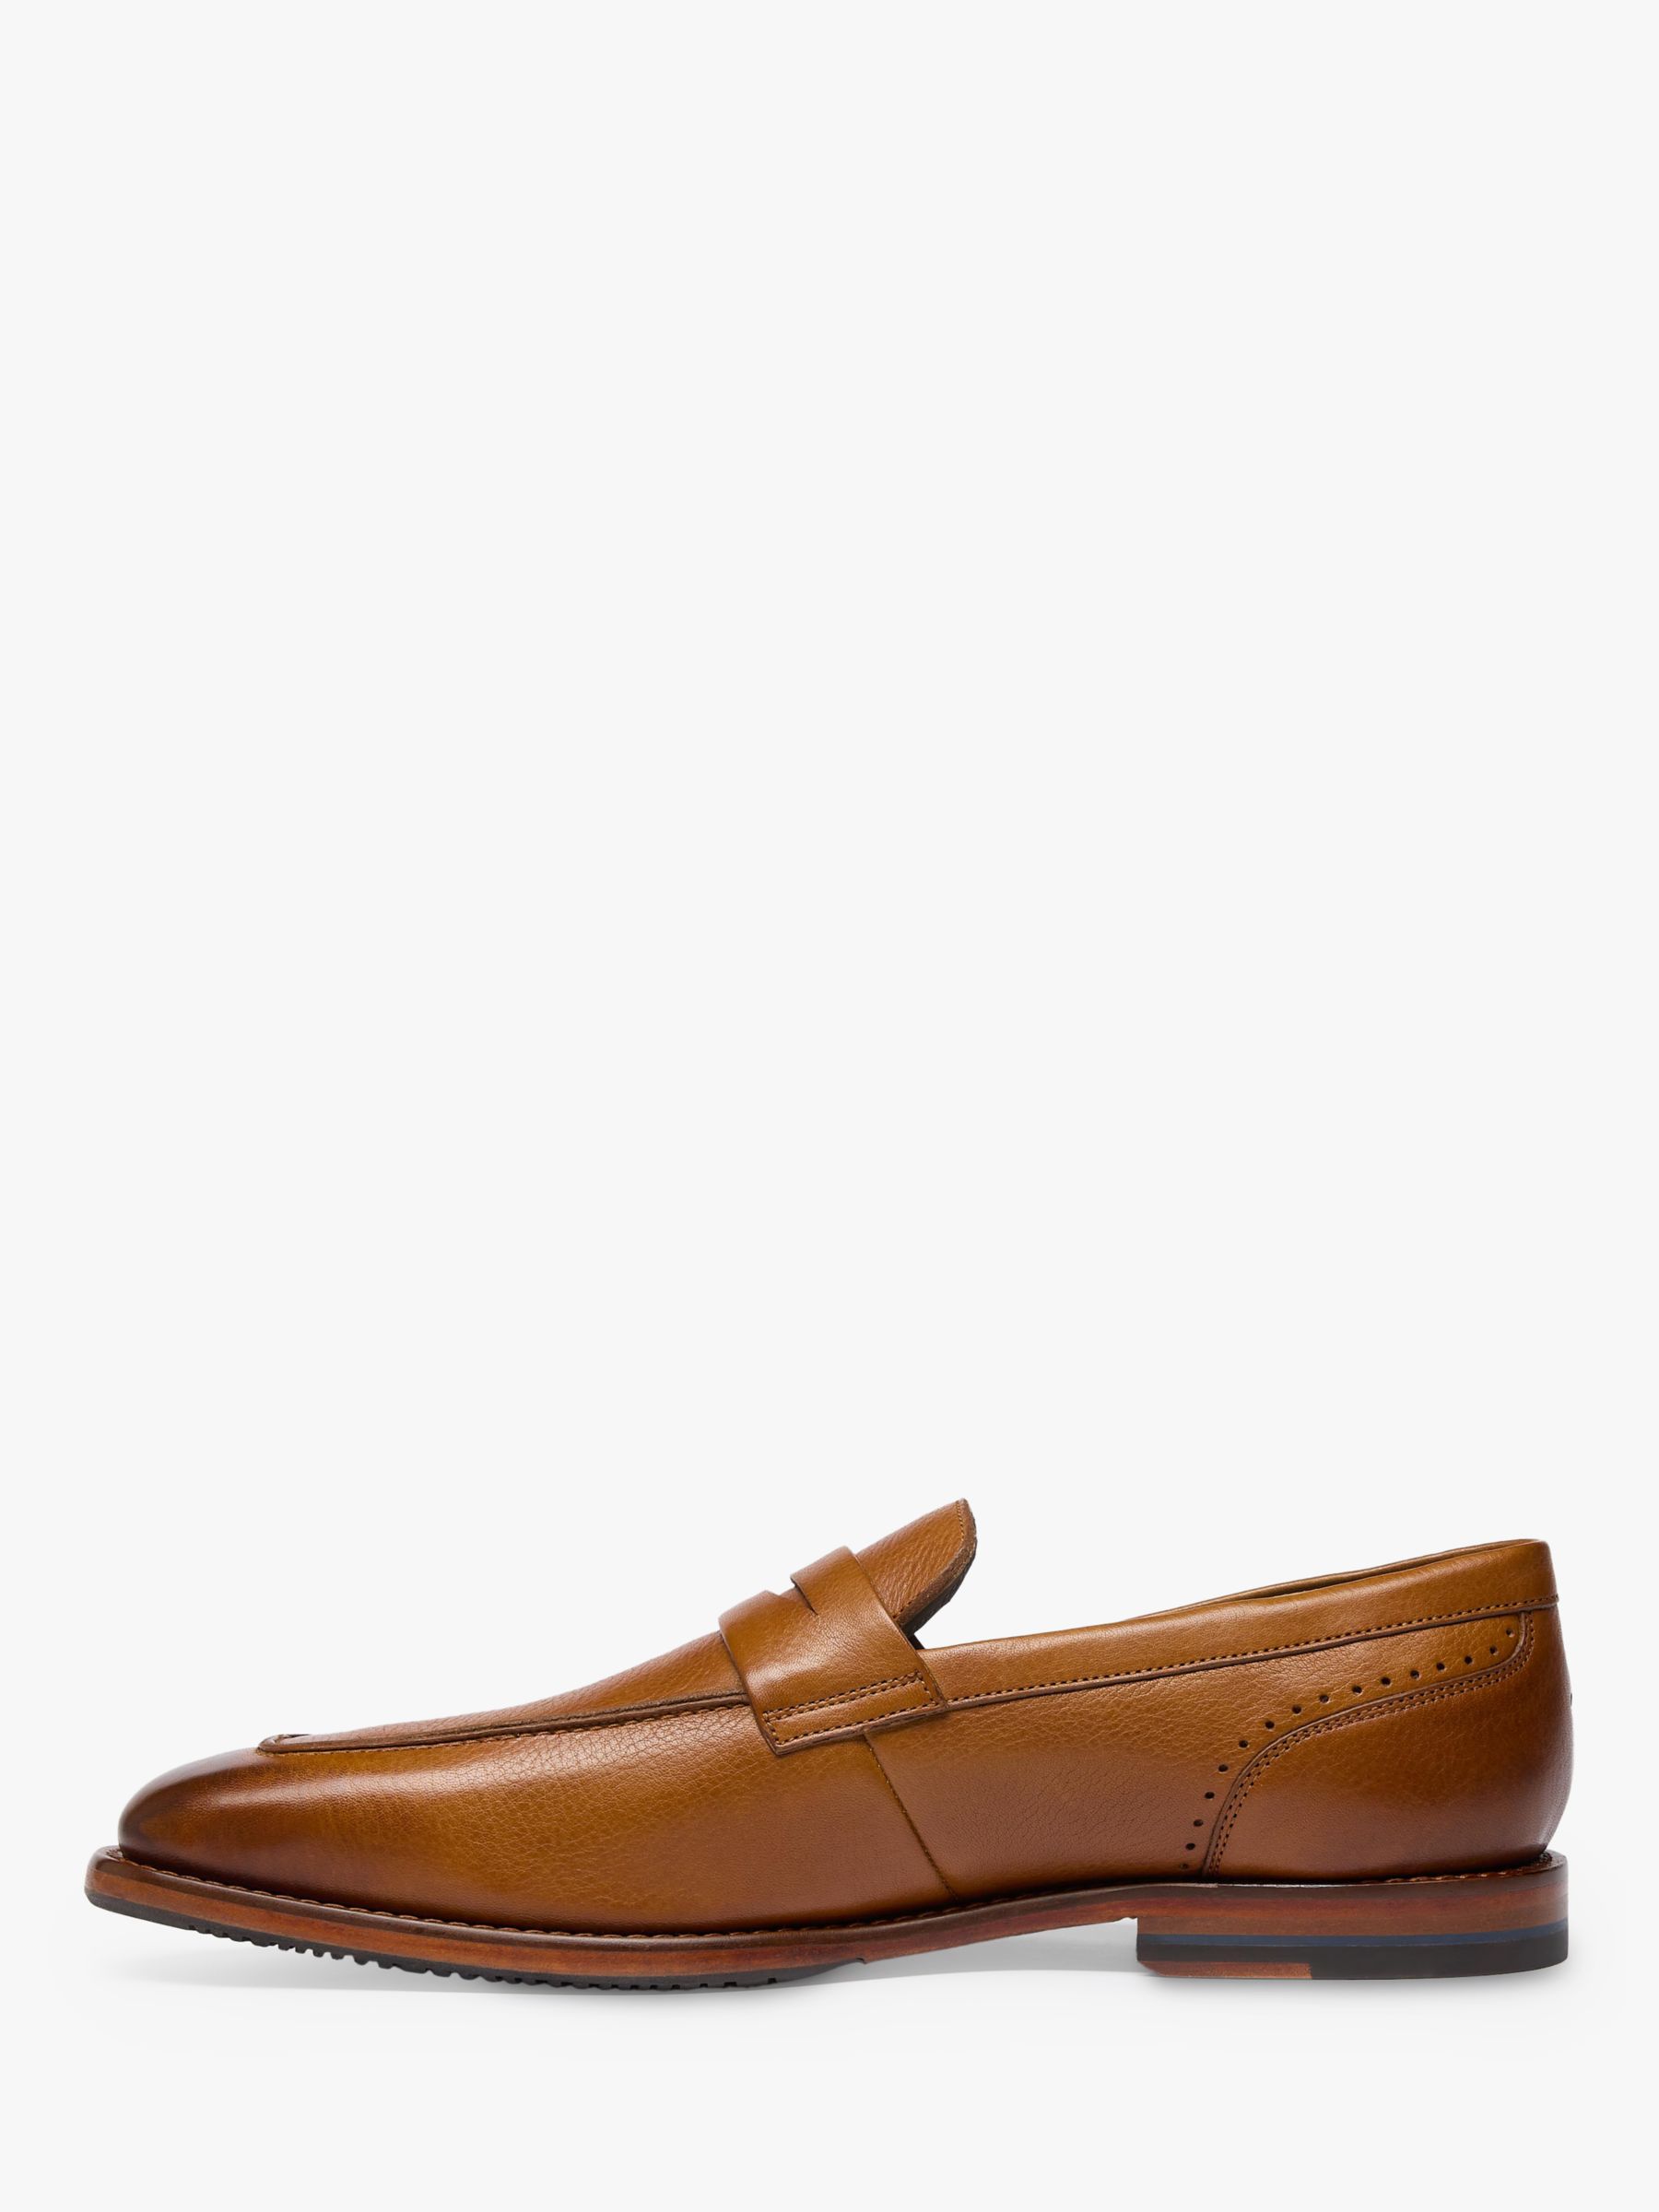 Oliver Sweeney Buckland Leather Loafer, Tan at John Lewis & Partners